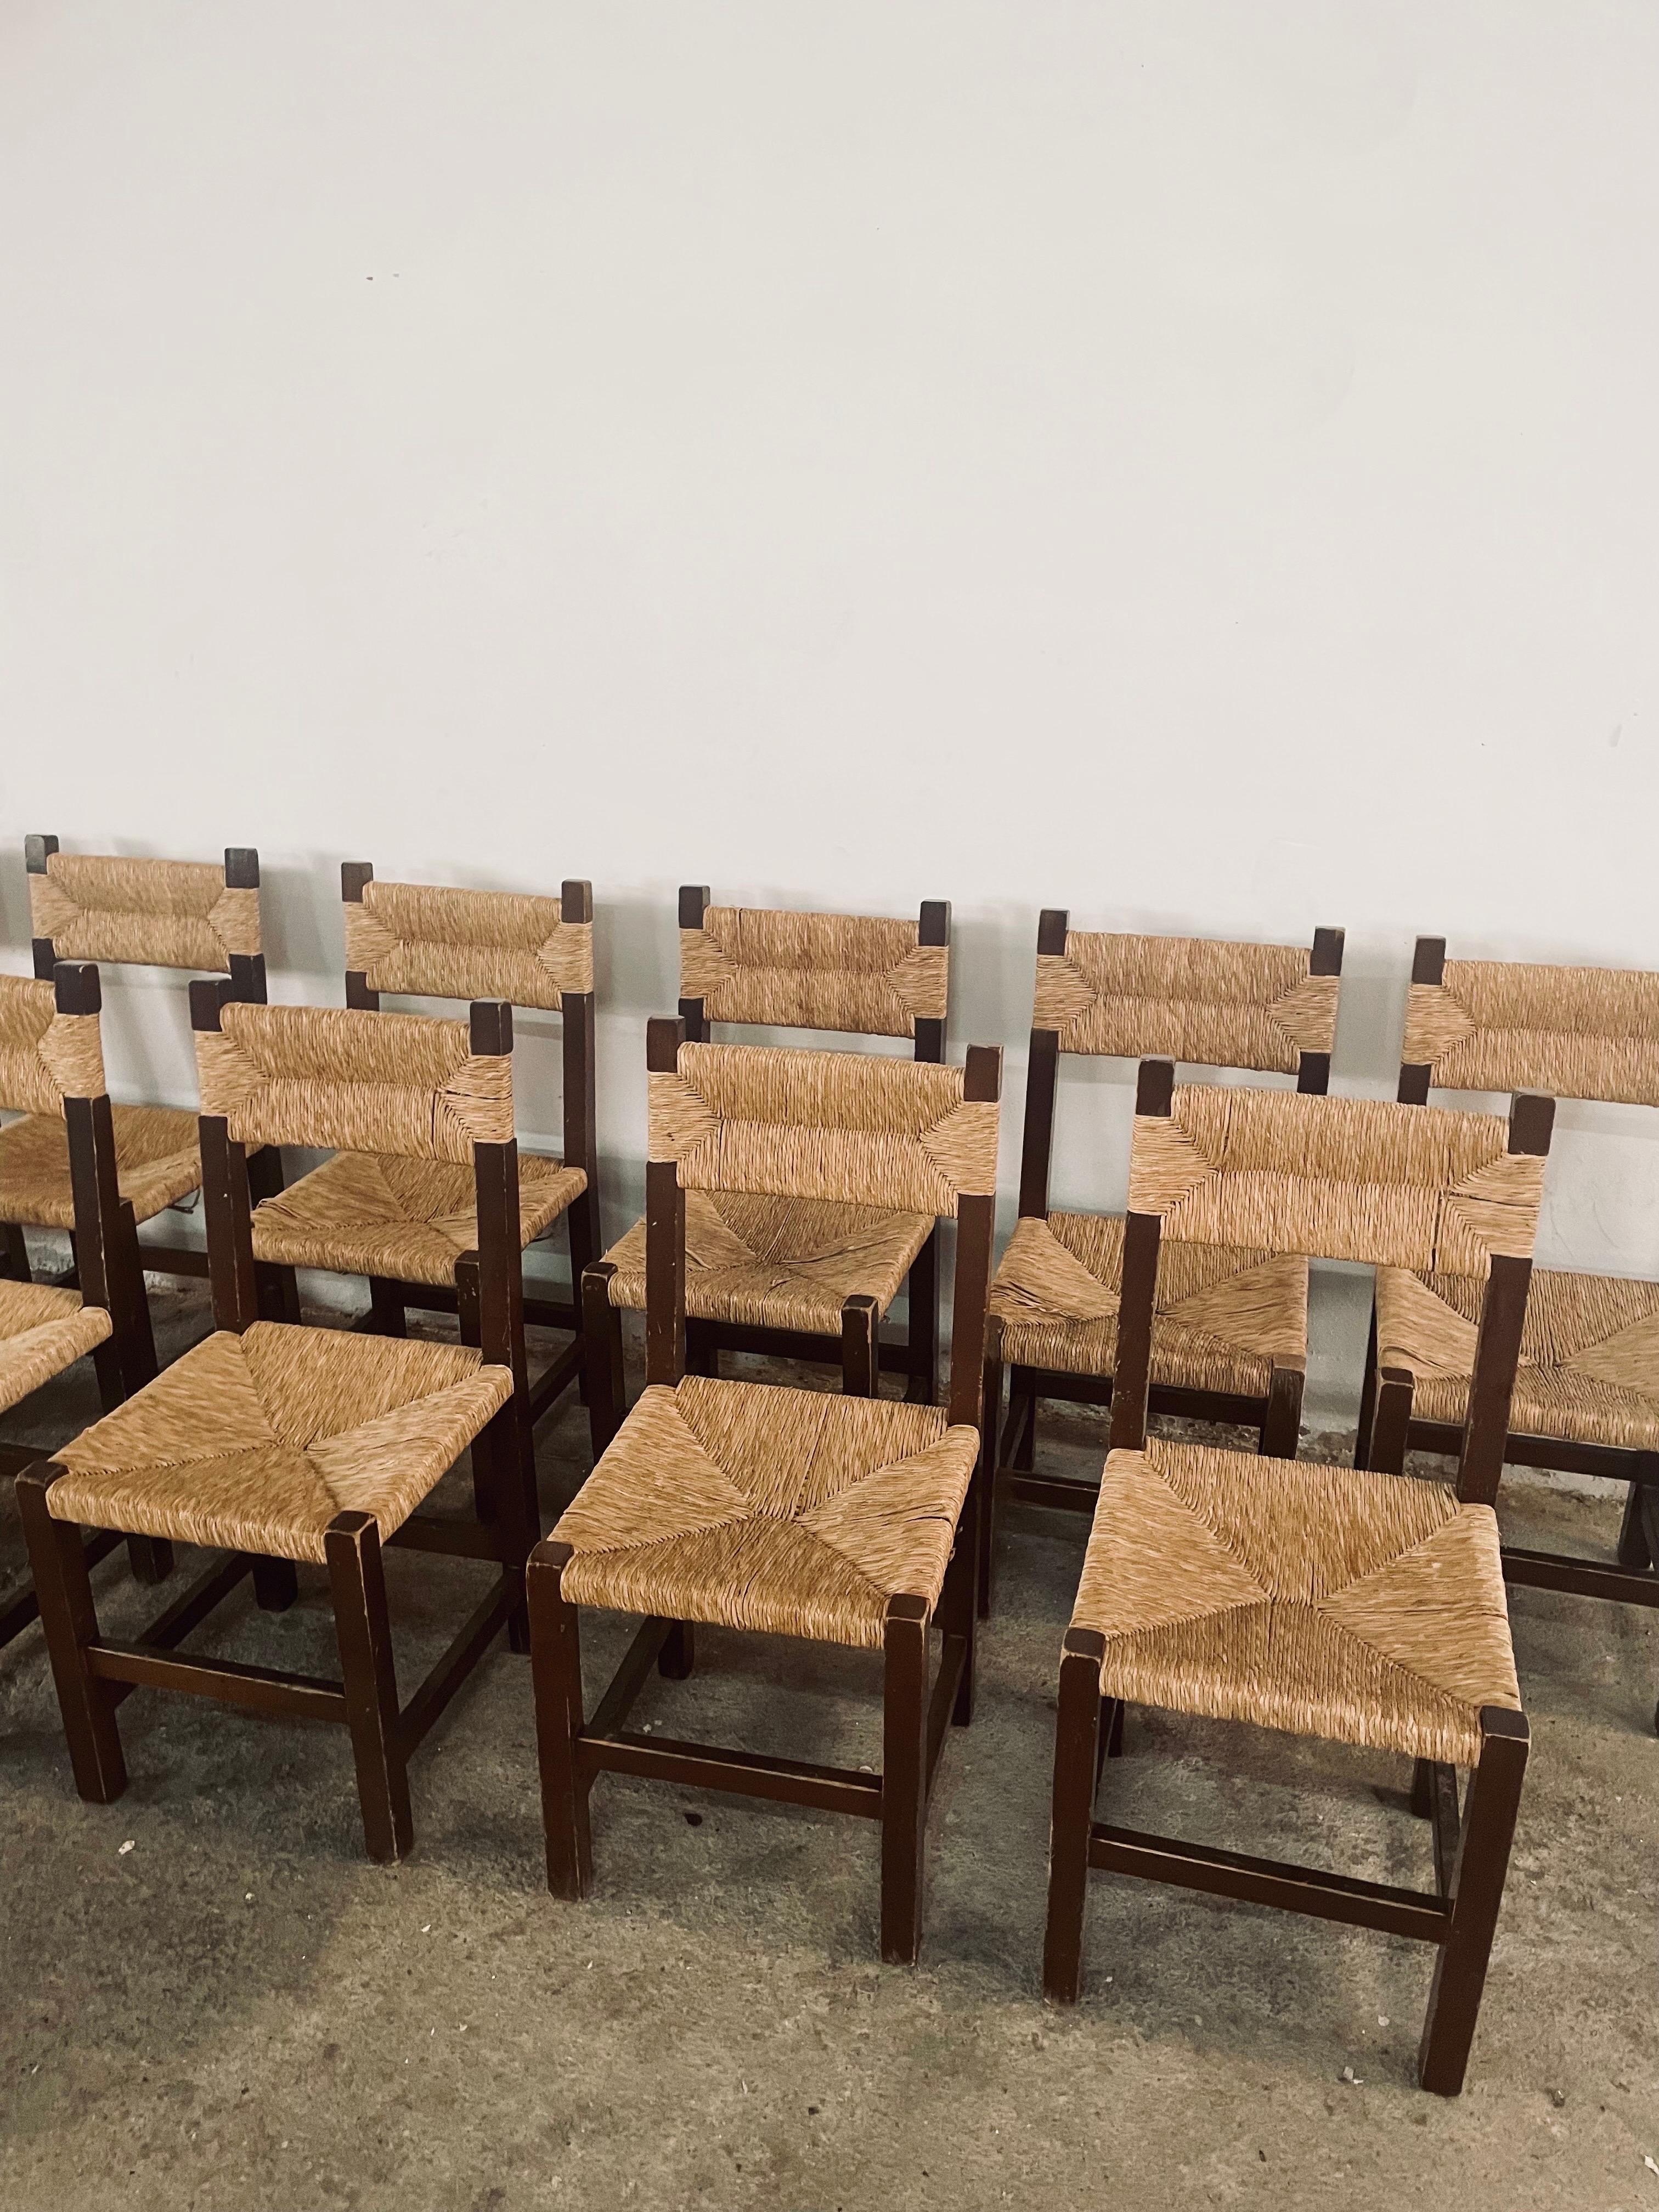 Set of eight (8) Vintage mid-century French Charles Dudouyt style country wicker or rush Seat Chairs, mostly original condition, Rush seats have been completely replaced by natural Anea using only artisanal techniques, This vintage set remains fully